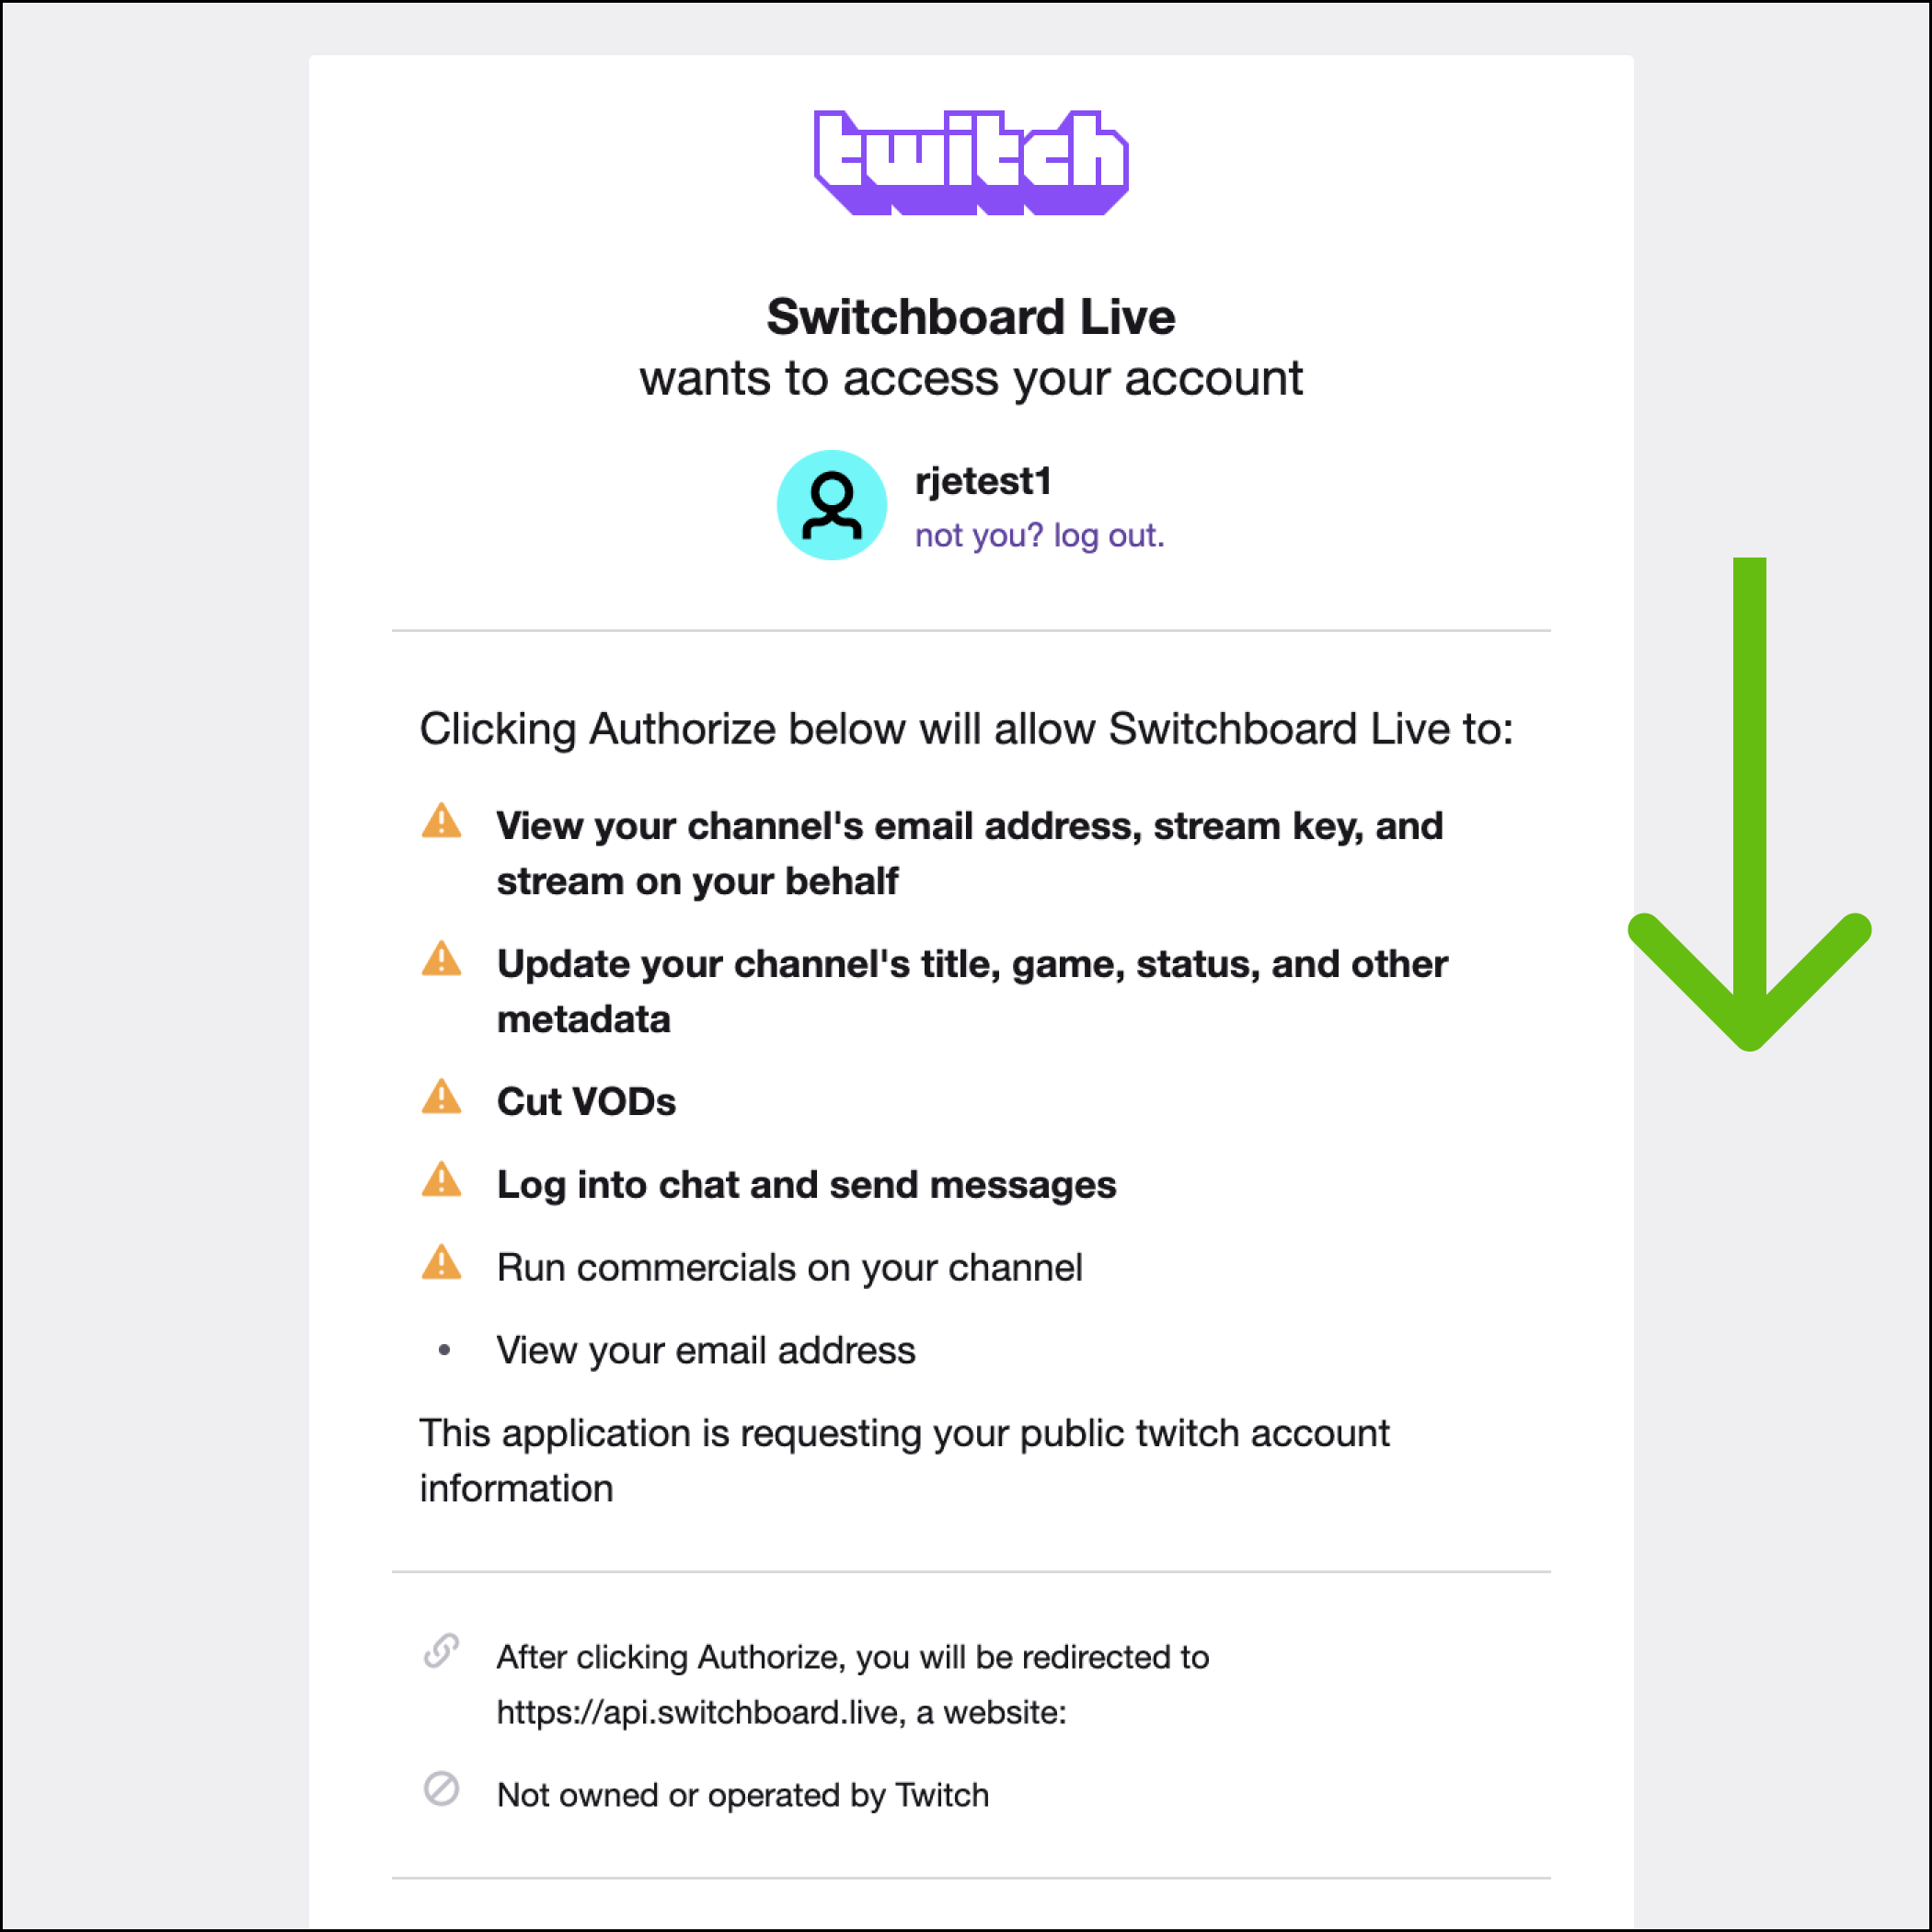 getting-started-add-Twitch-1.png